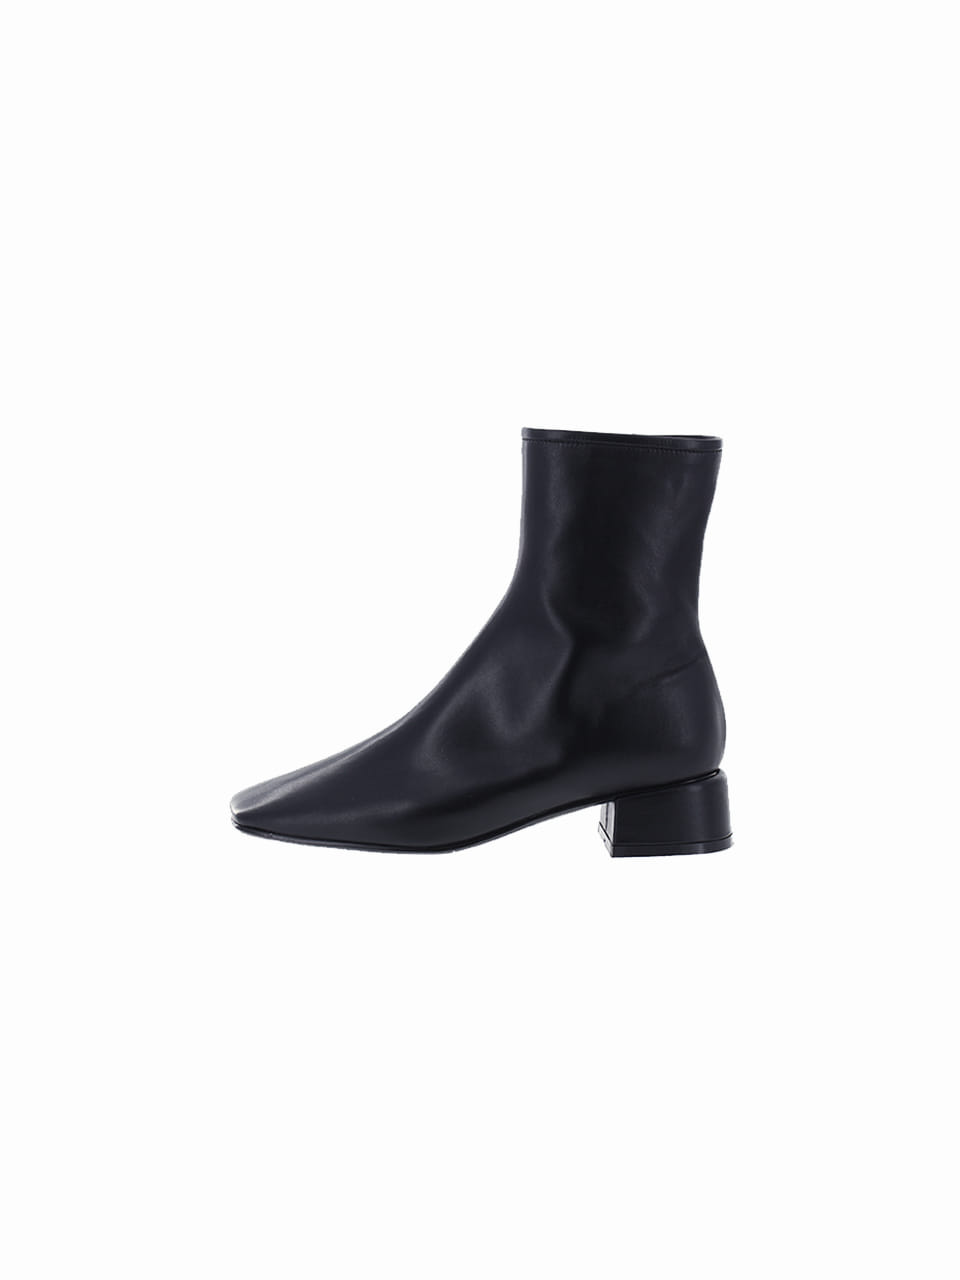 SMX middle boots_black